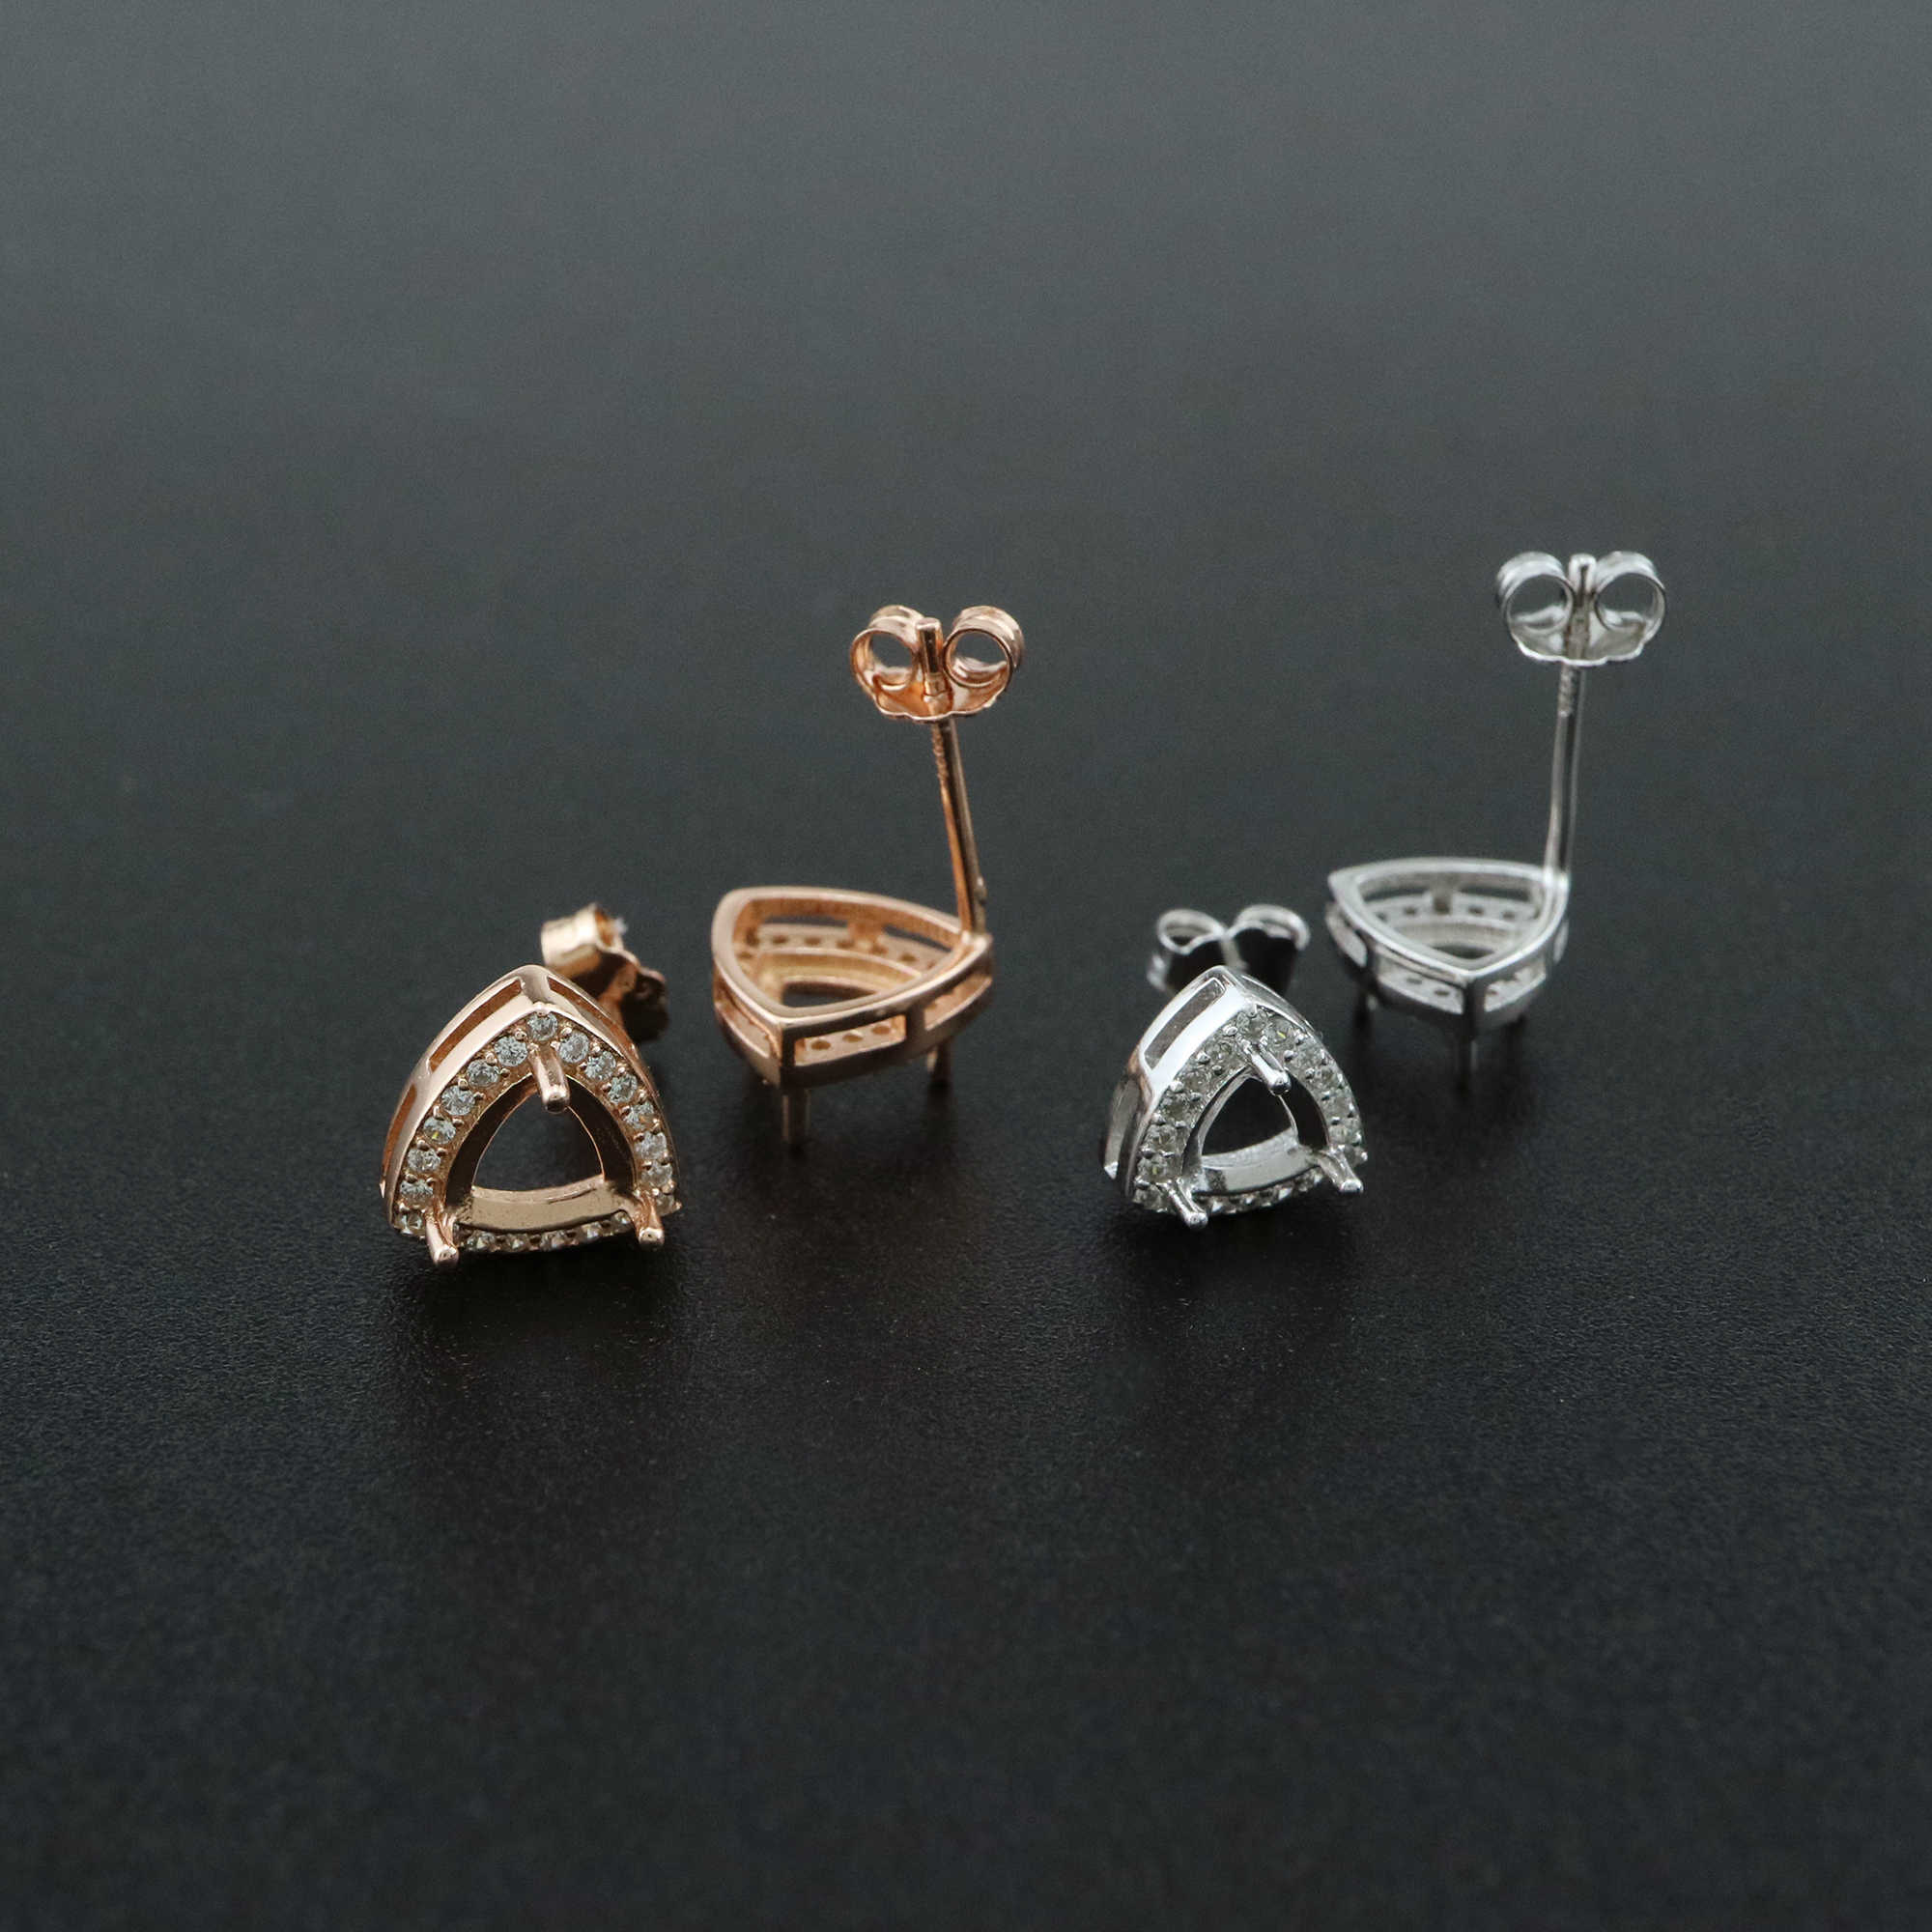 1Pair 5-6MM Rose Gold Plated Solid 925 Sterling Silver Trillion Triangle Prong Bezel DIY Studs Earrings Settings for Gemstone Jewelry Supplies 1706047 - Click Image to Close